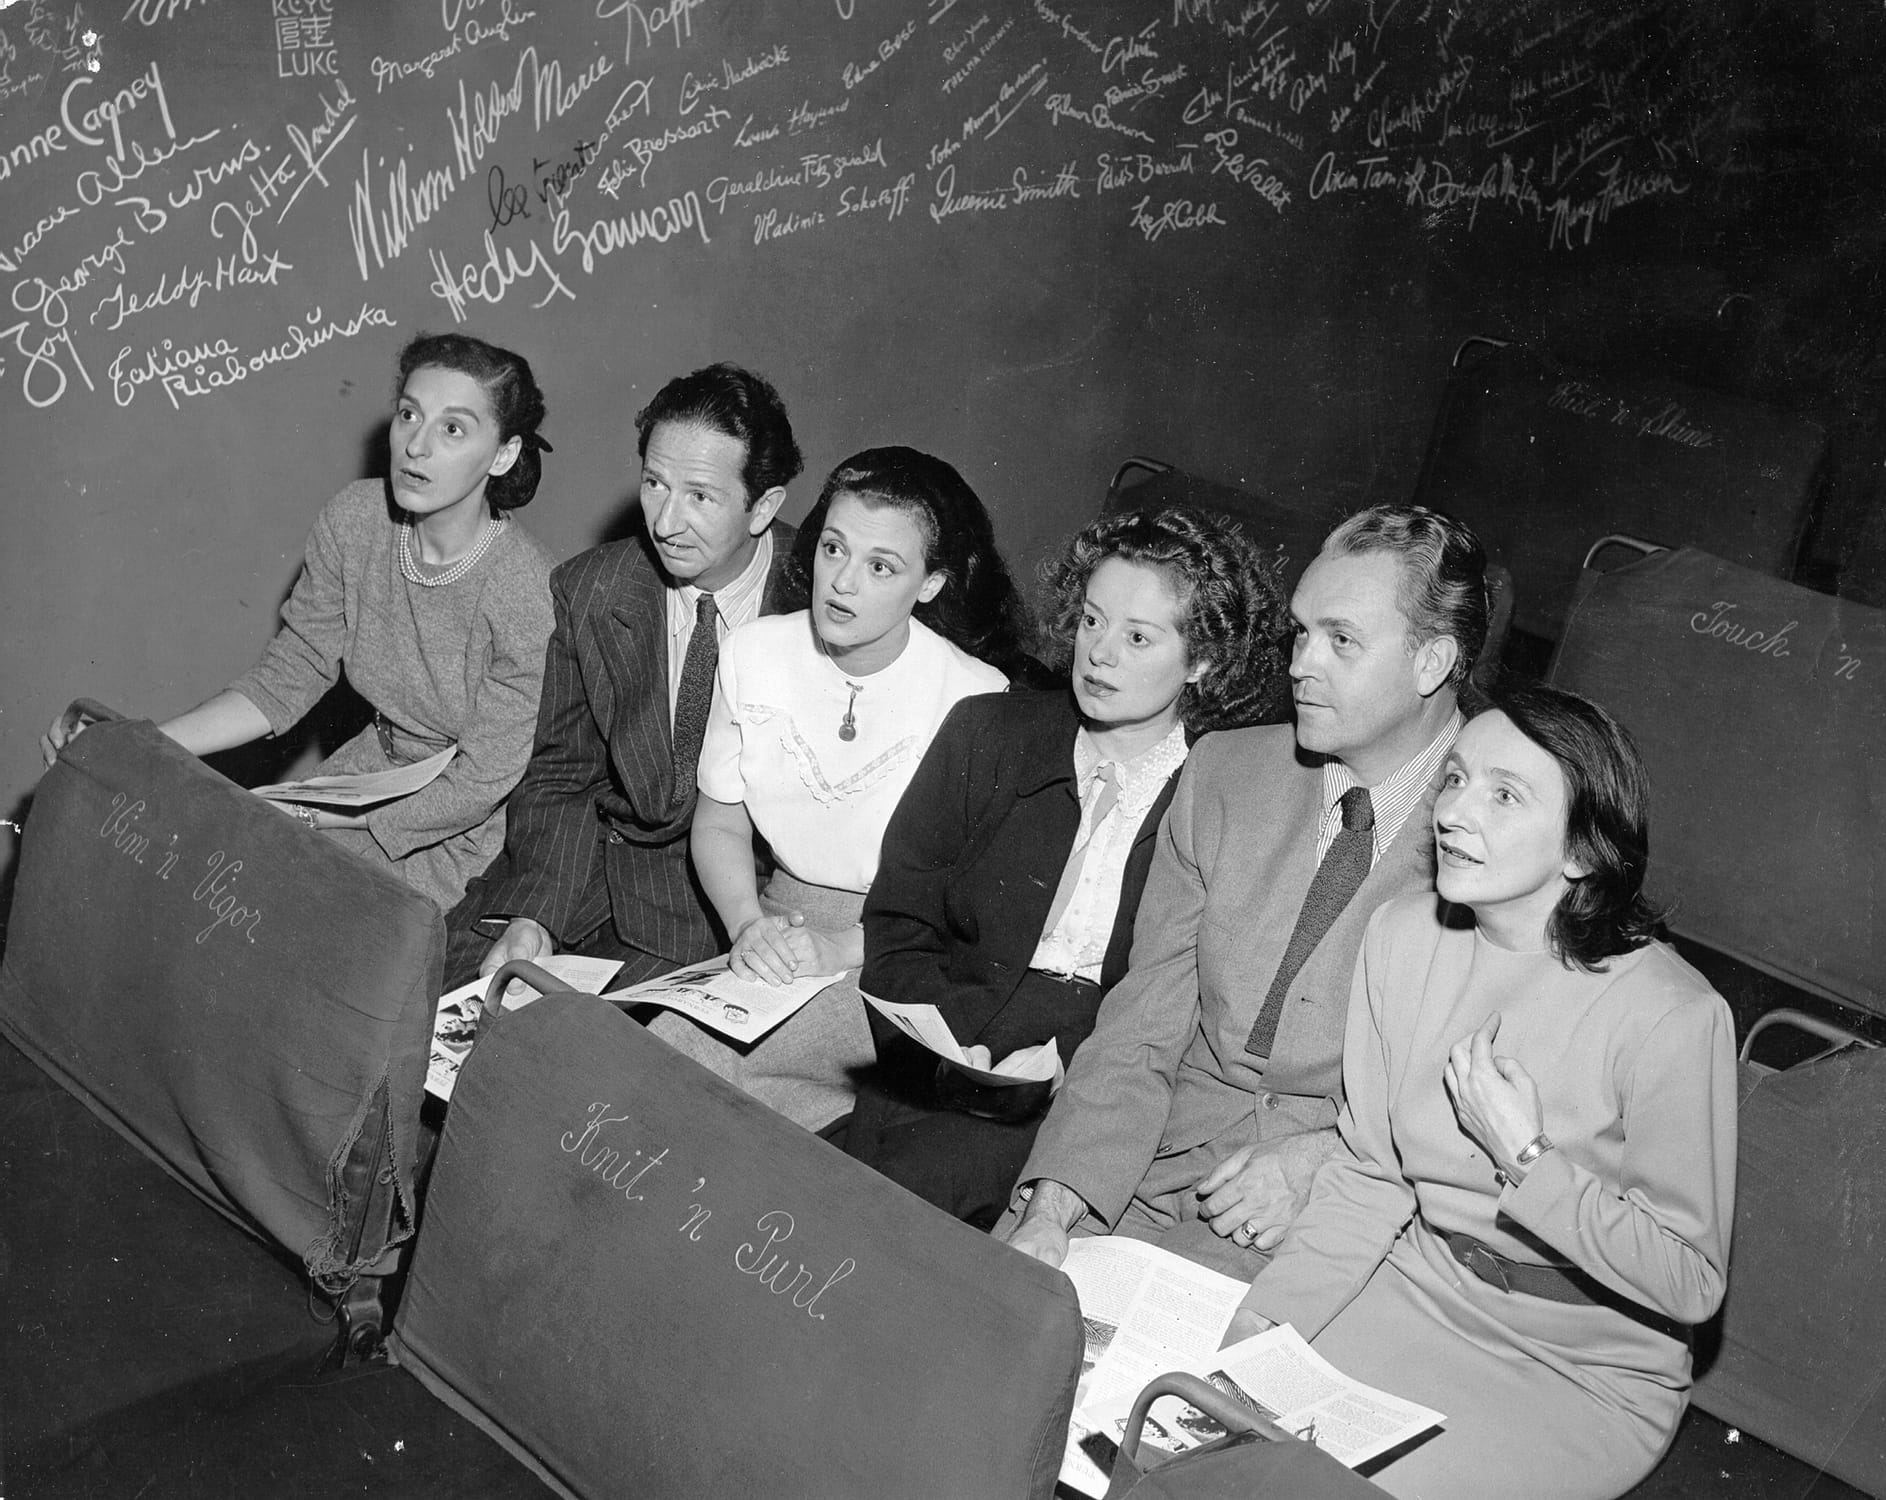 Dorothy Neumann, Harry Burnett, Frances Osborne, Elsa Lanchester, Forman Brown, and Lotte Gosler sit in the Turnabout Theater, with the autograph wall in the background.